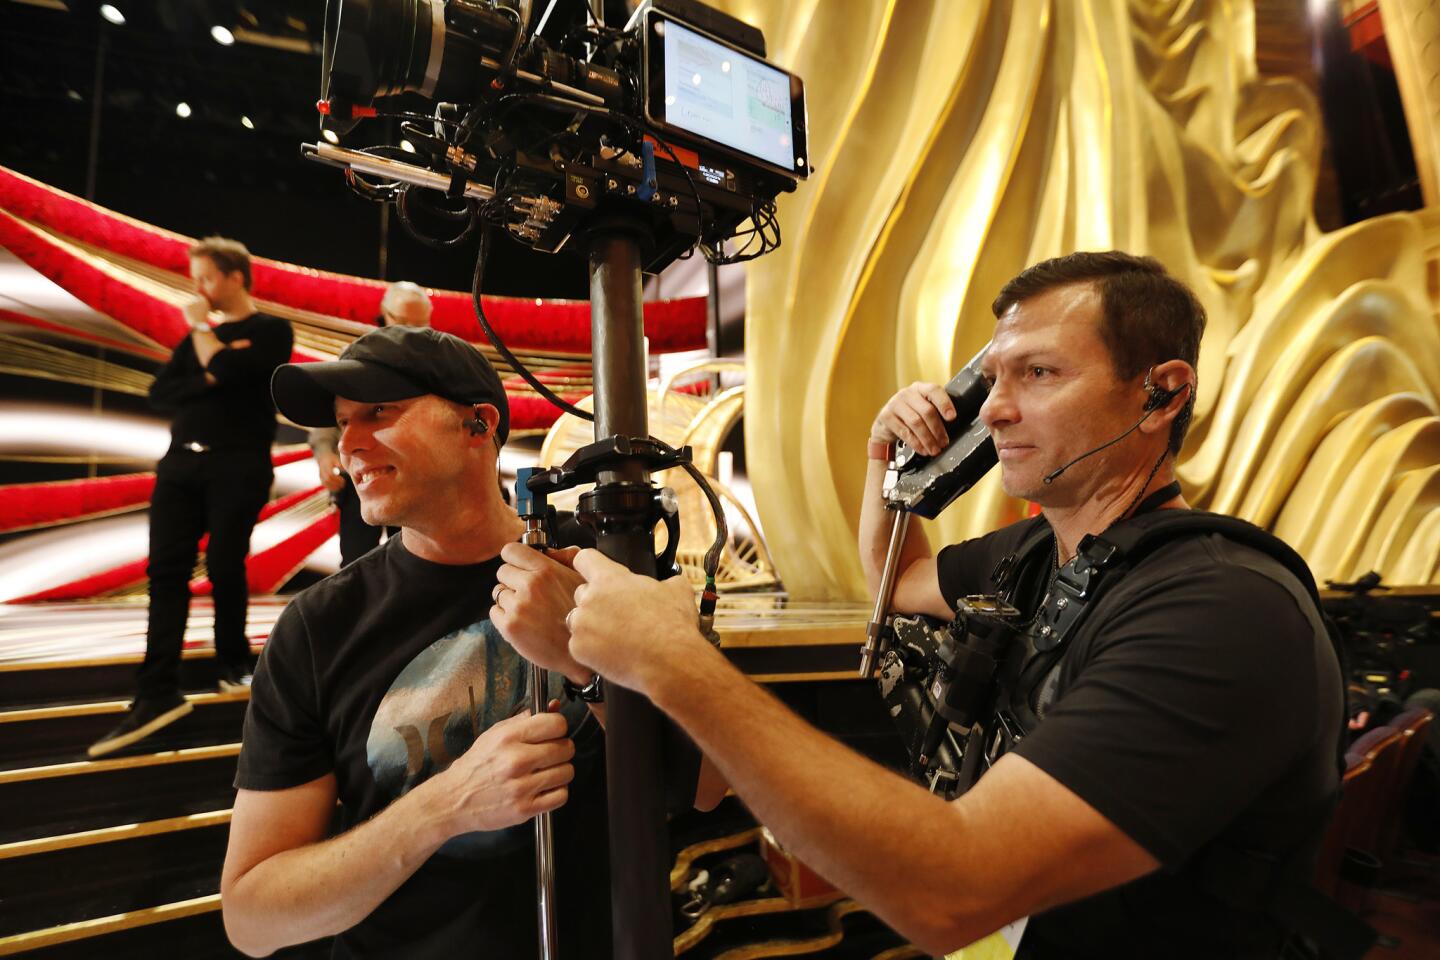 Preparations for the 2019 Oscars show